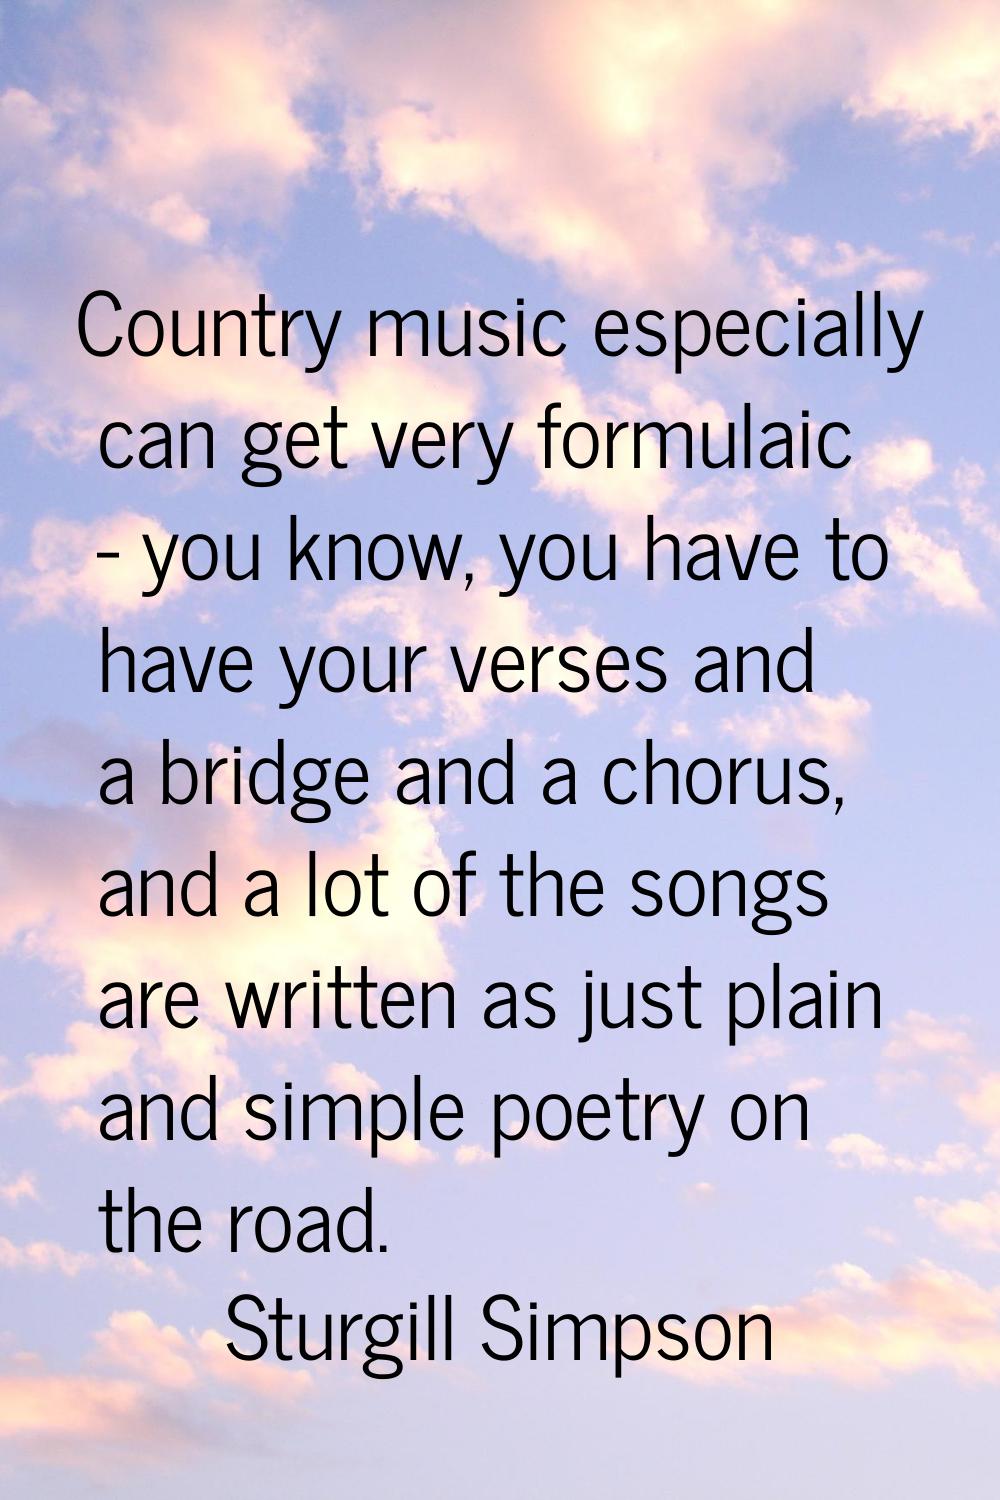 Country music especially can get very formulaic - you know, you have to have your verses and a brid